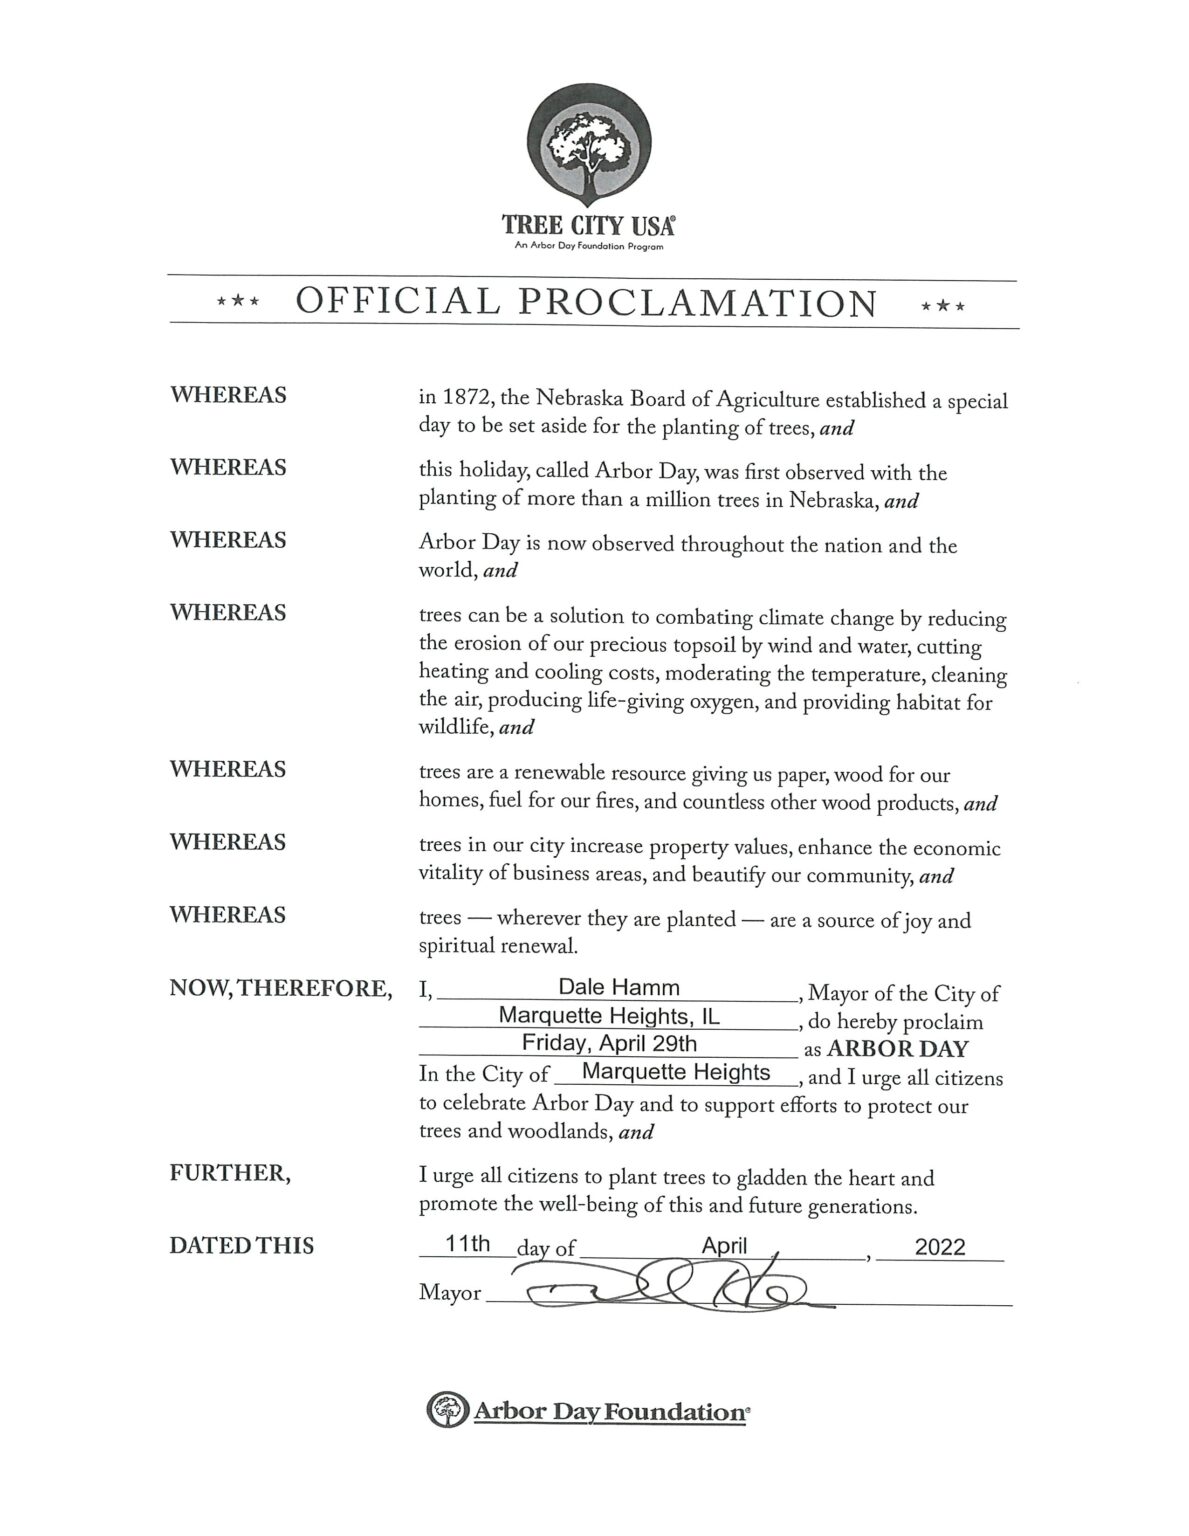 Arbor Day Proclamation City of Marquette Heights